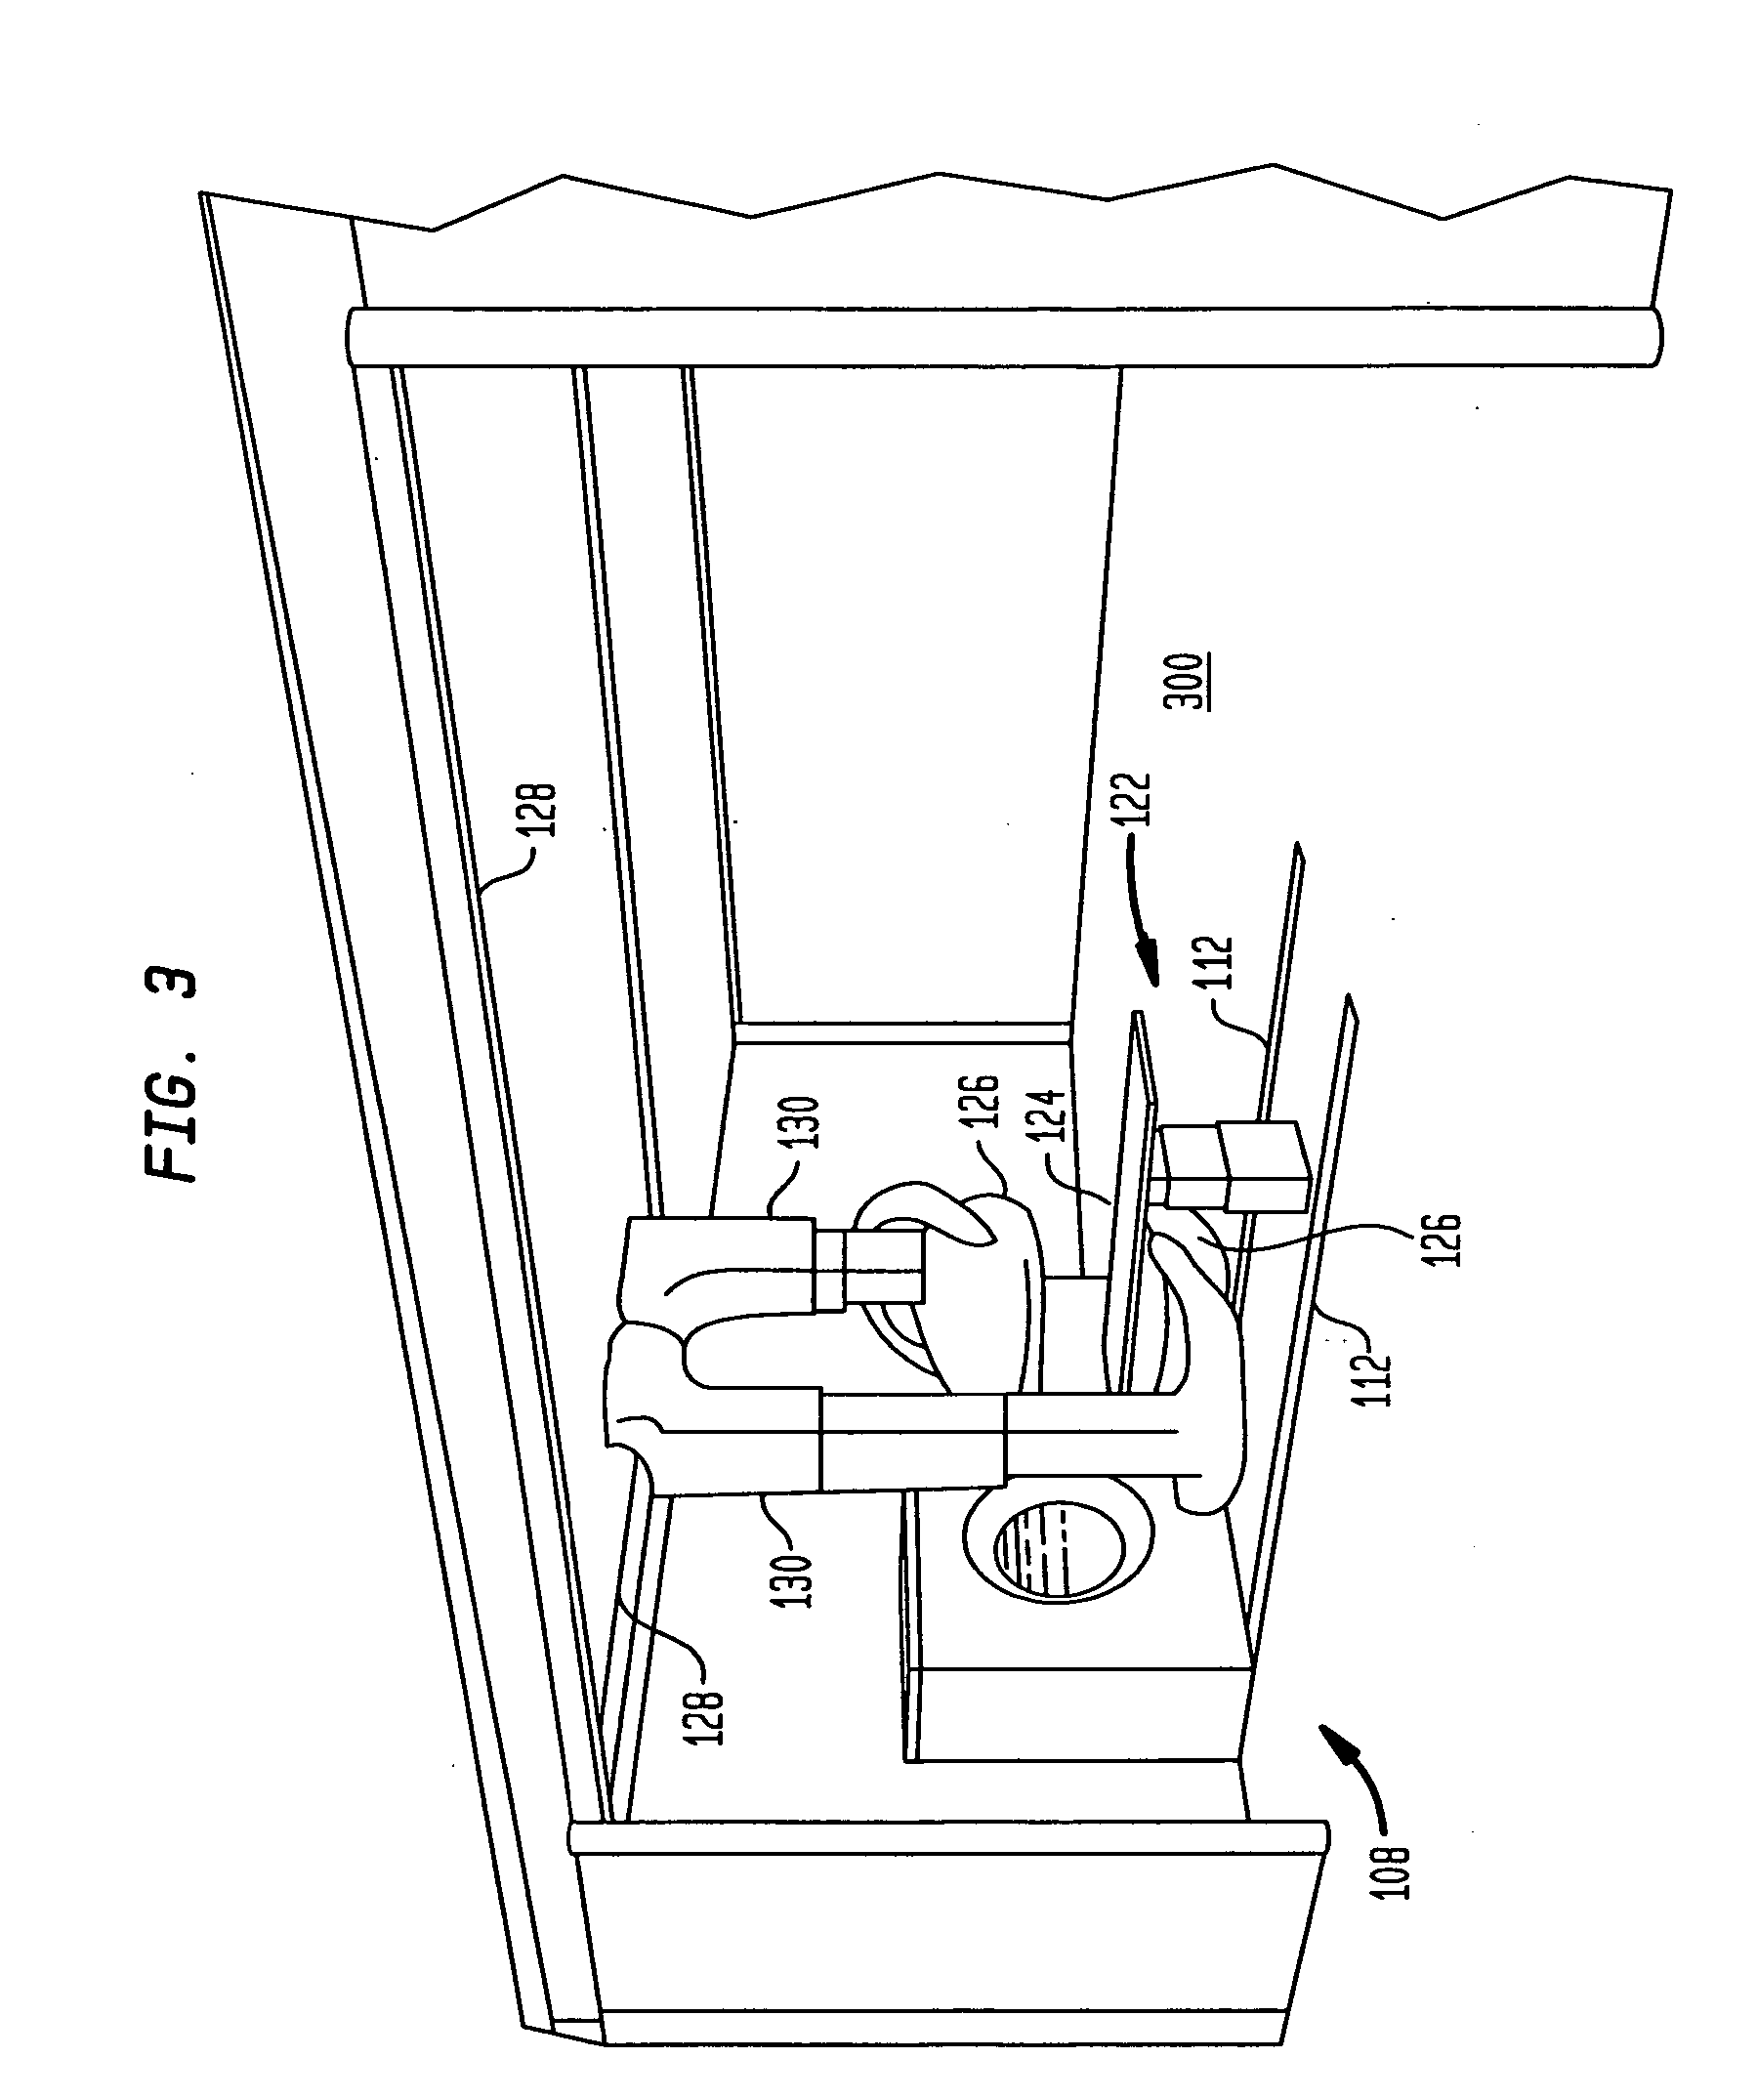 Separate and combined multi-modality diagnostic imaging system